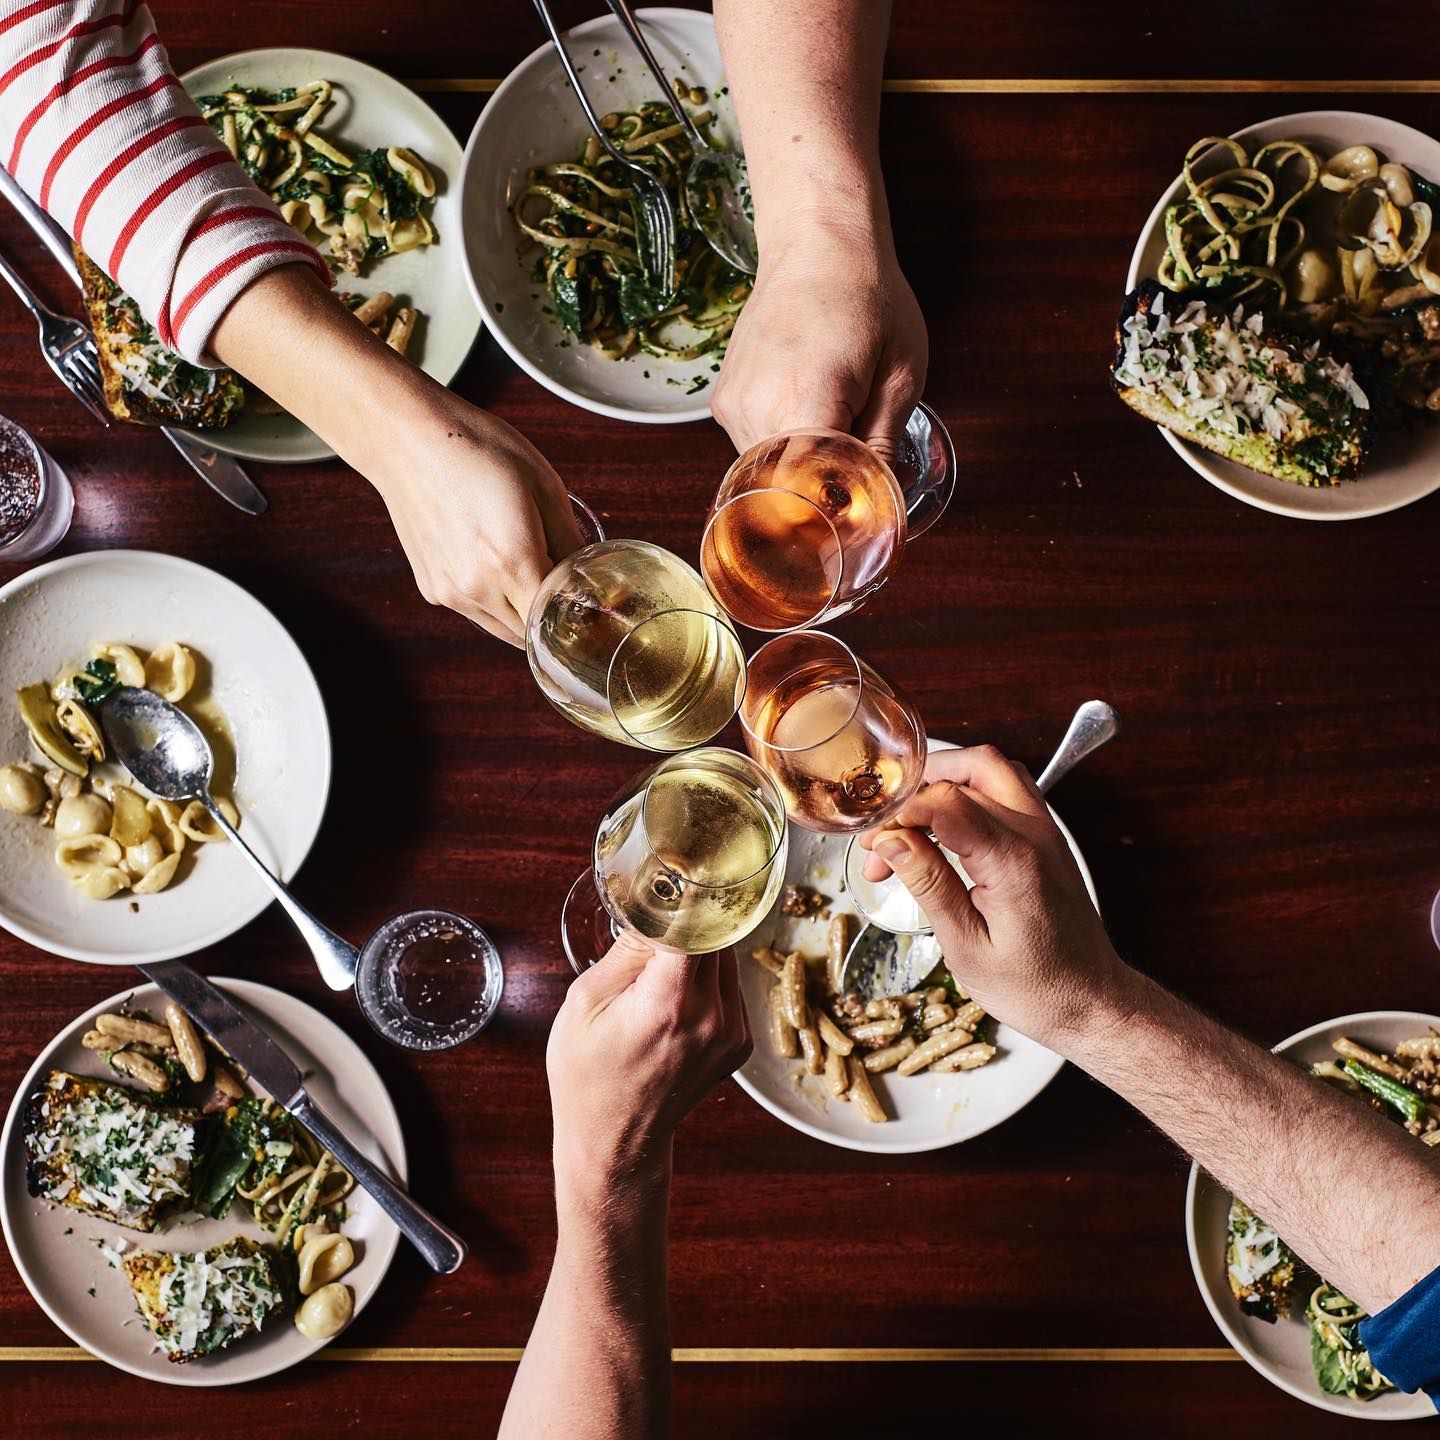 A group of friends gather and cheers their wines over plates of food. 